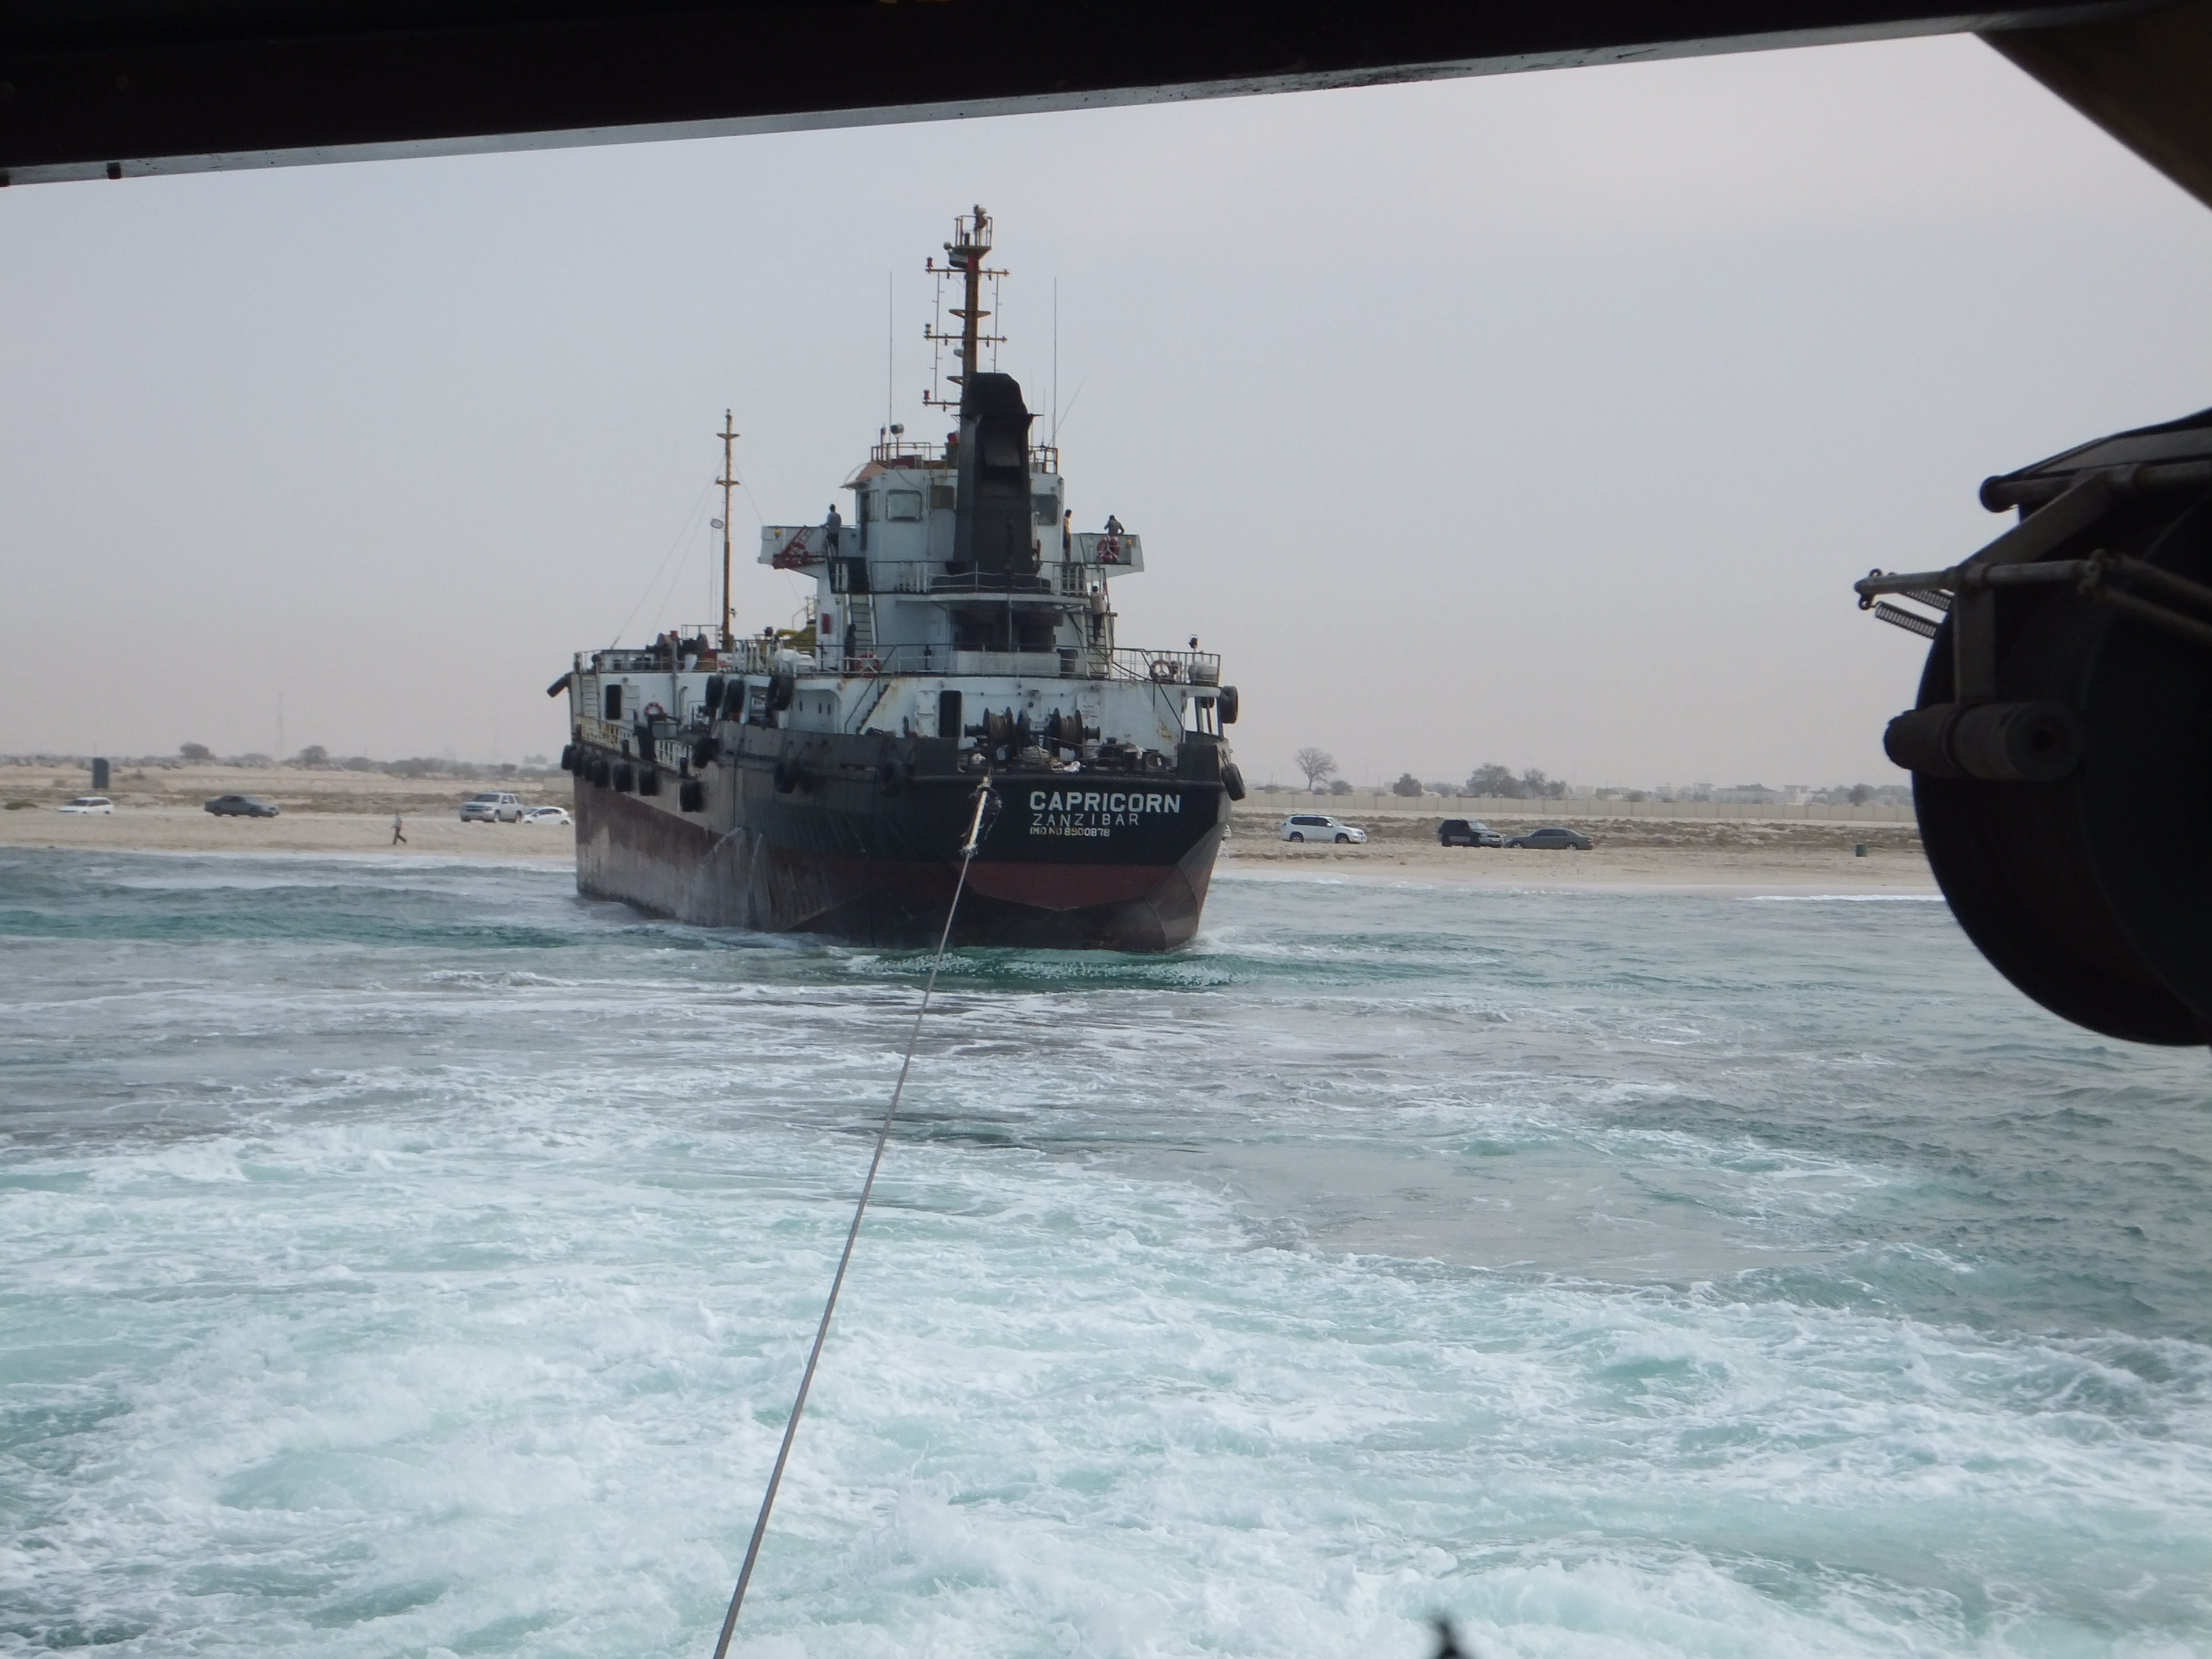 LSI Successfully completed Salvage operation for Vessels ‘Banda Asia’ and ‘Capricorn’